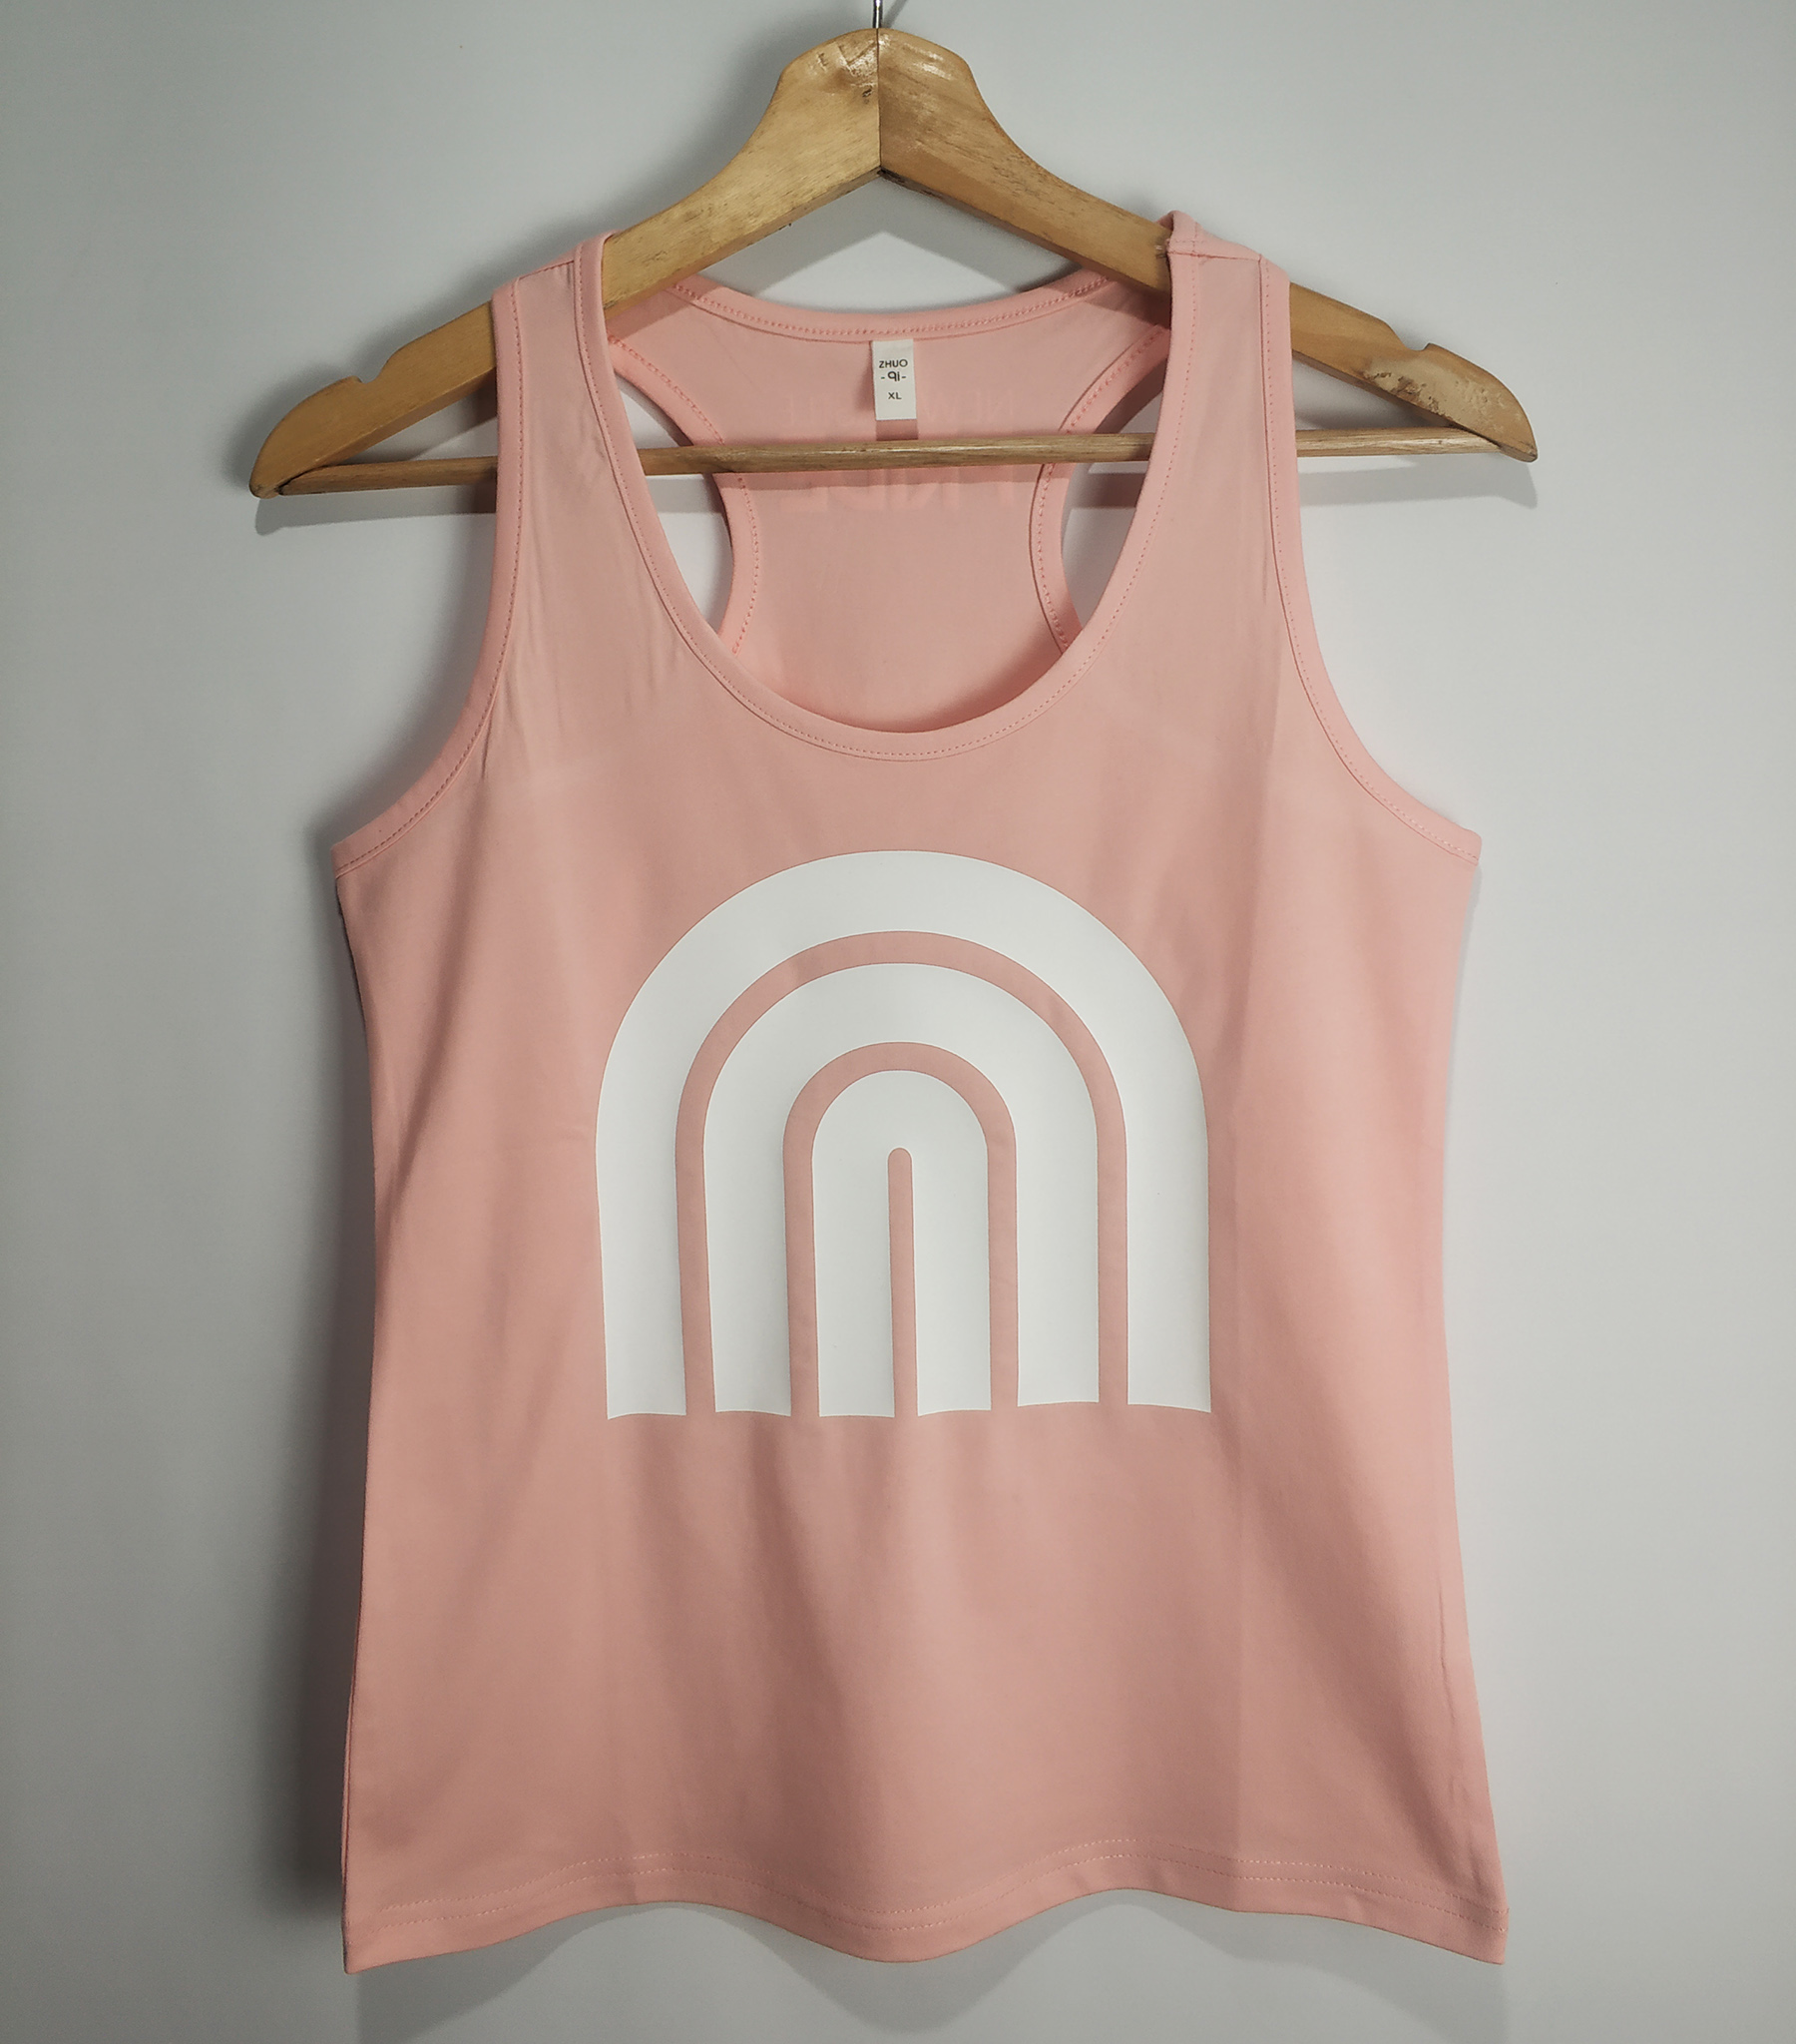 Personalized Ladies tank tops with own logo printed 